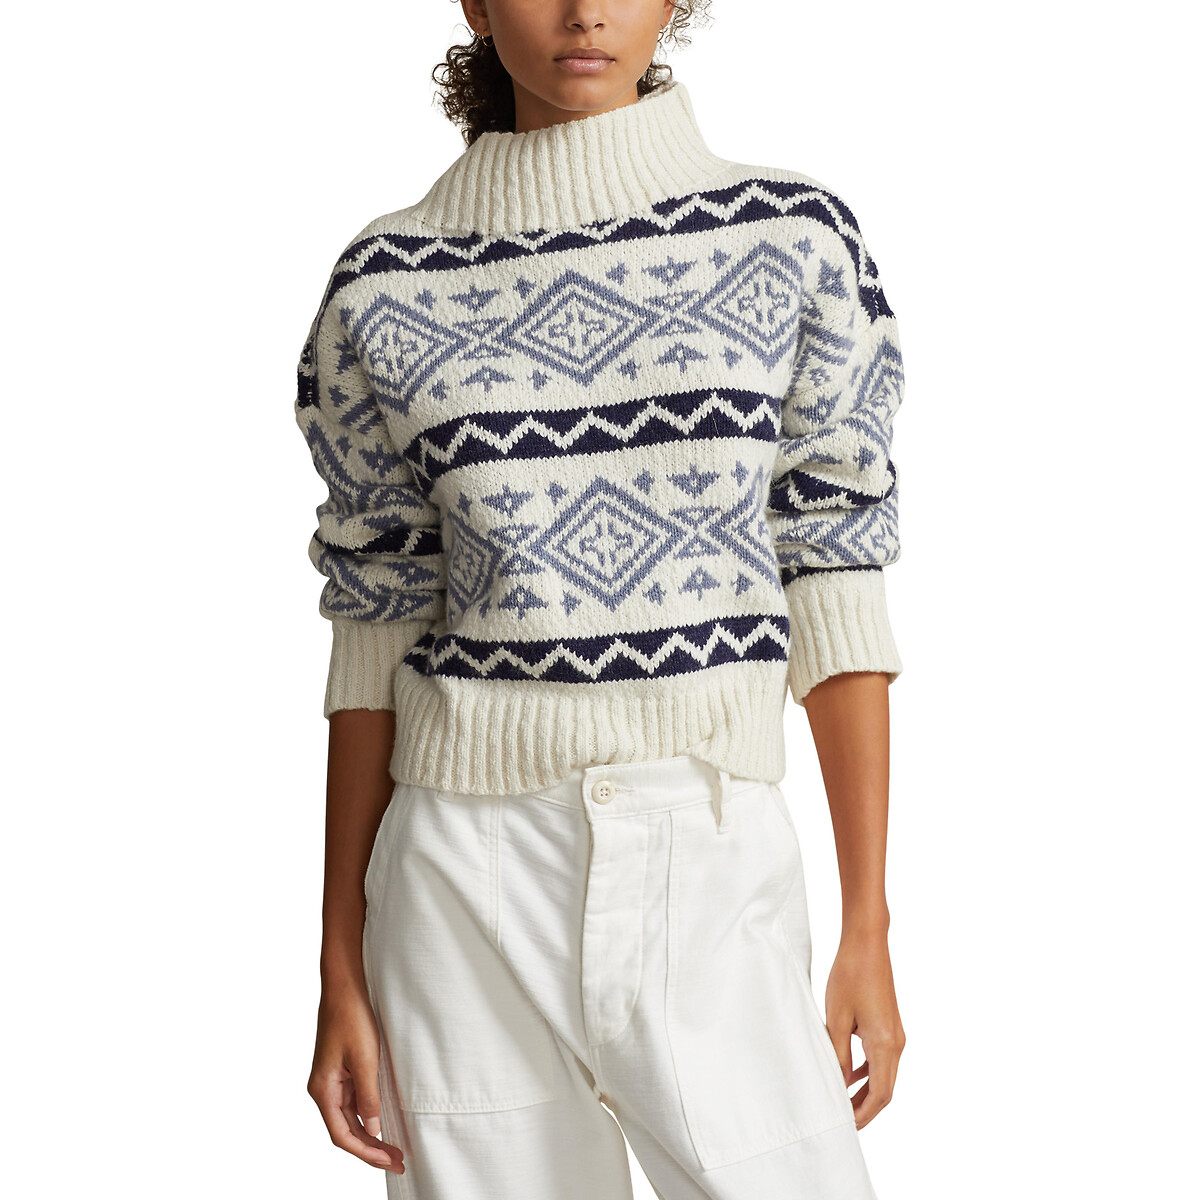 Cropped Jacquard Jumper in Wool Mix with Mock Neck